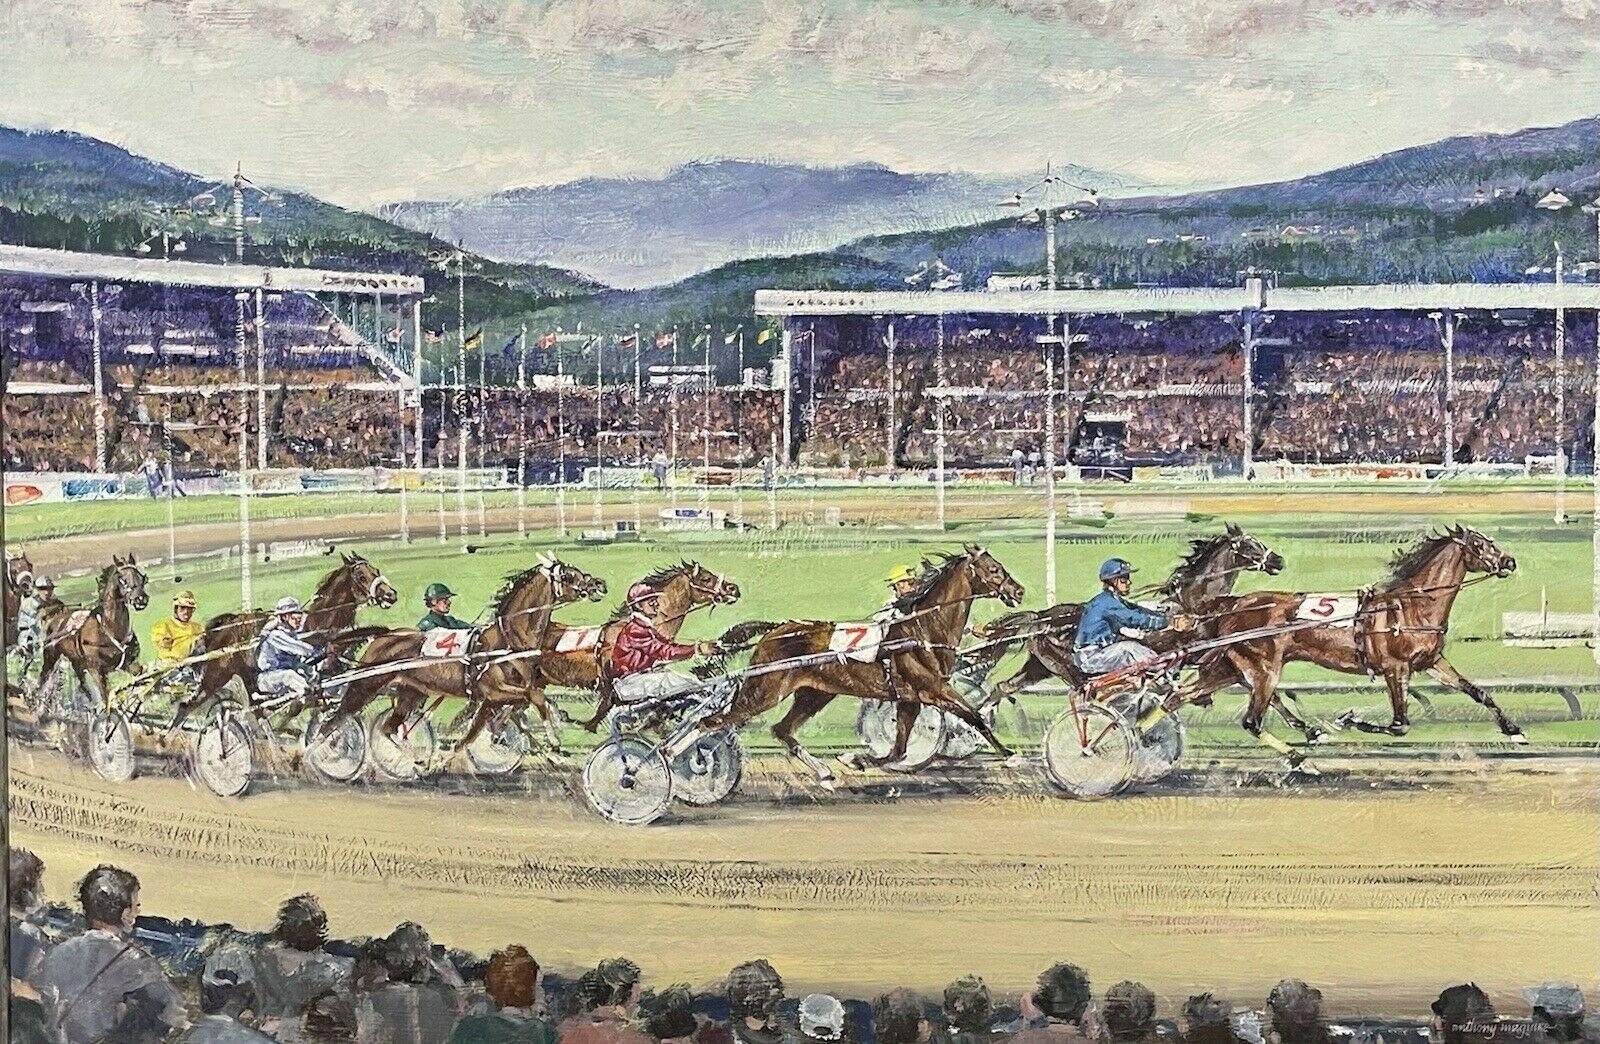 Anthony Maguire Animal Painting - NORWEGIAN TROTTING HORSE RACING - LARGE OIL PAINTING - BY ANTHONY MAGUIRE